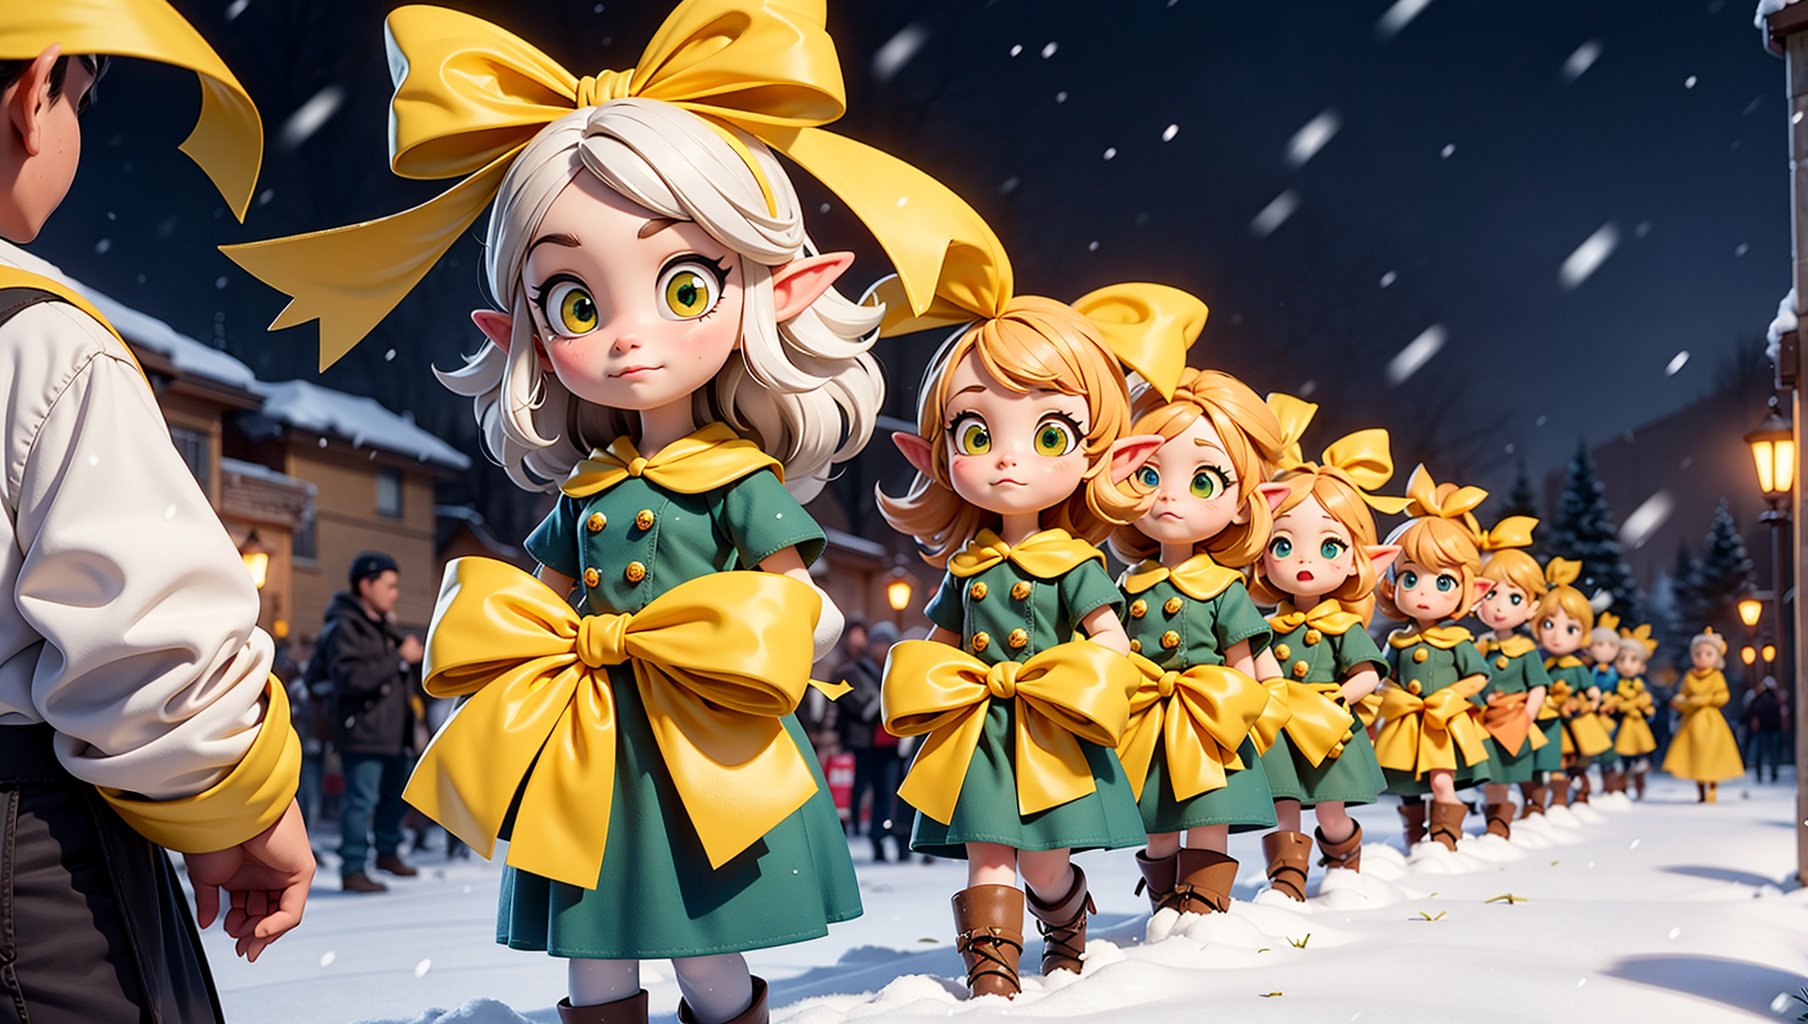 over 10 elves ((holding yellow ribbons)),walking towards viewer holding yellow ribbons. Snowing,explosions in the background,